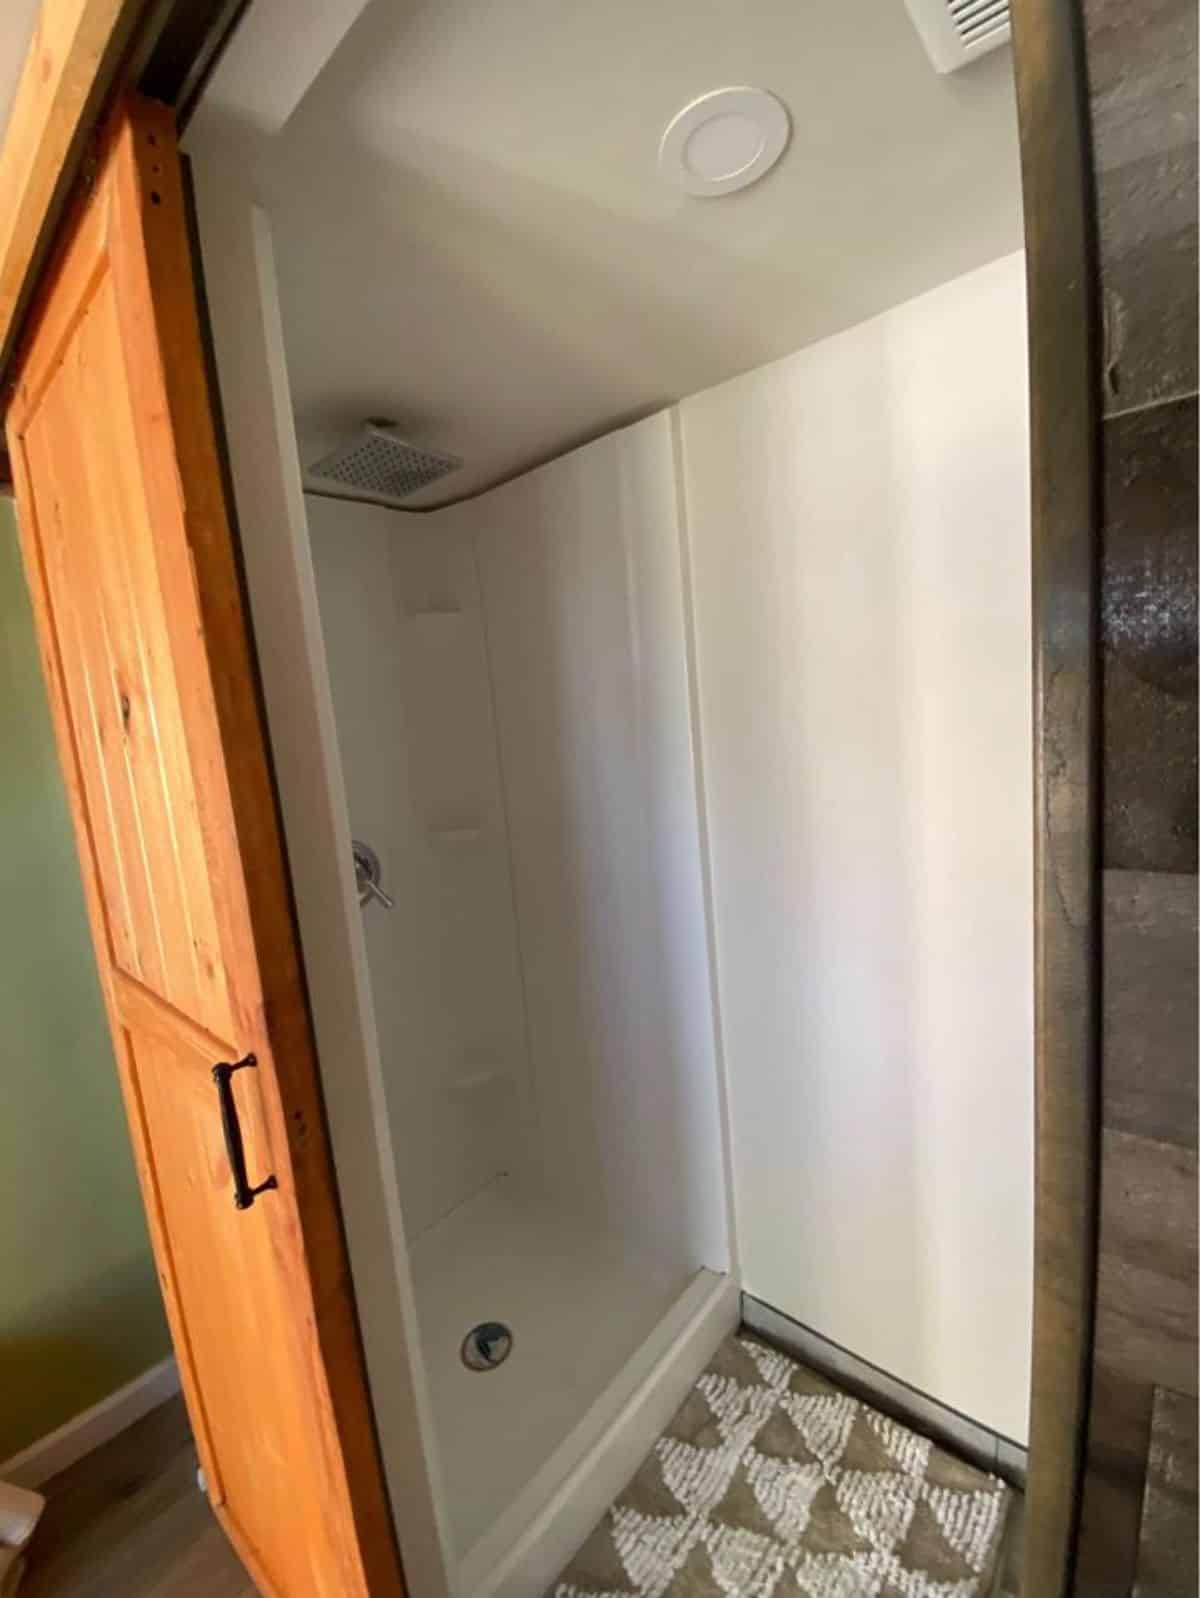 Bathroom of Tiny Home With Sleeping Loft has all the regular fitting plus separate shower area